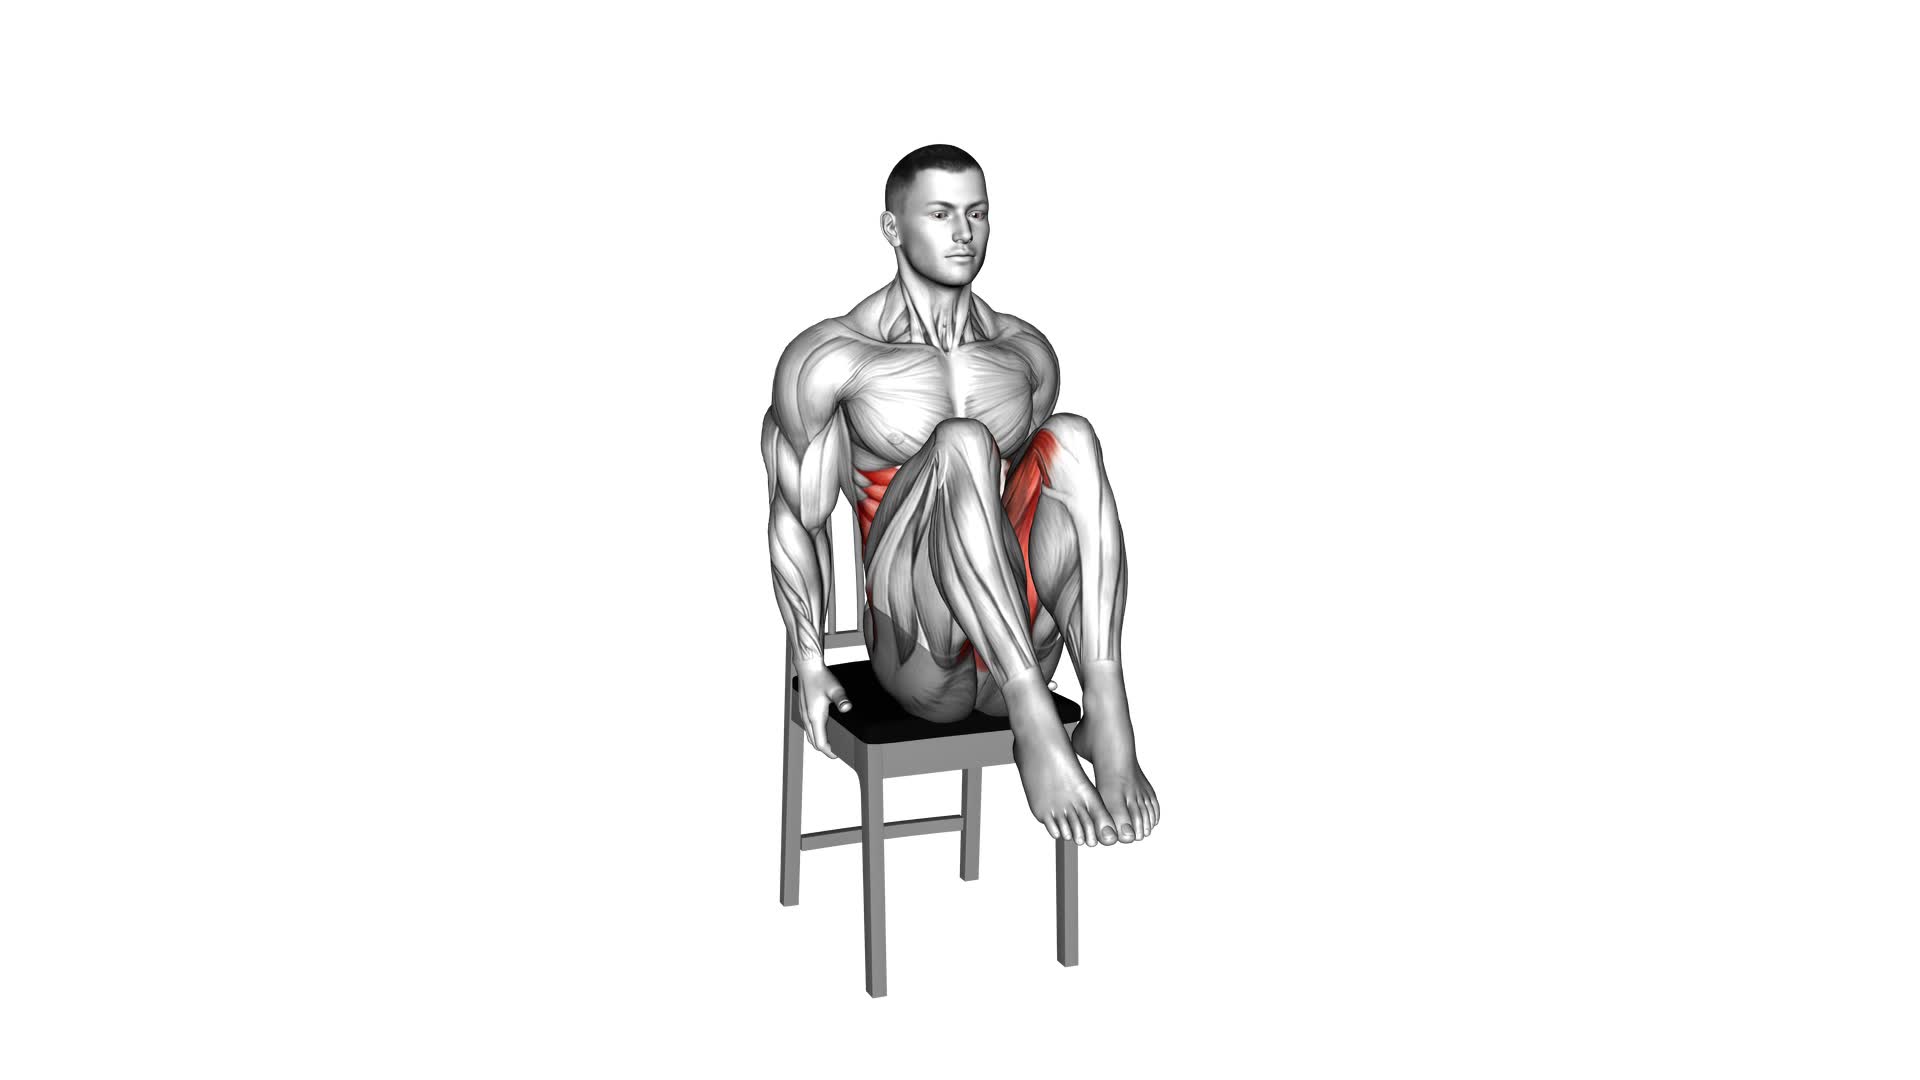 Diagonal In Out on Chair (male) - Video Exercise Guide & Tips